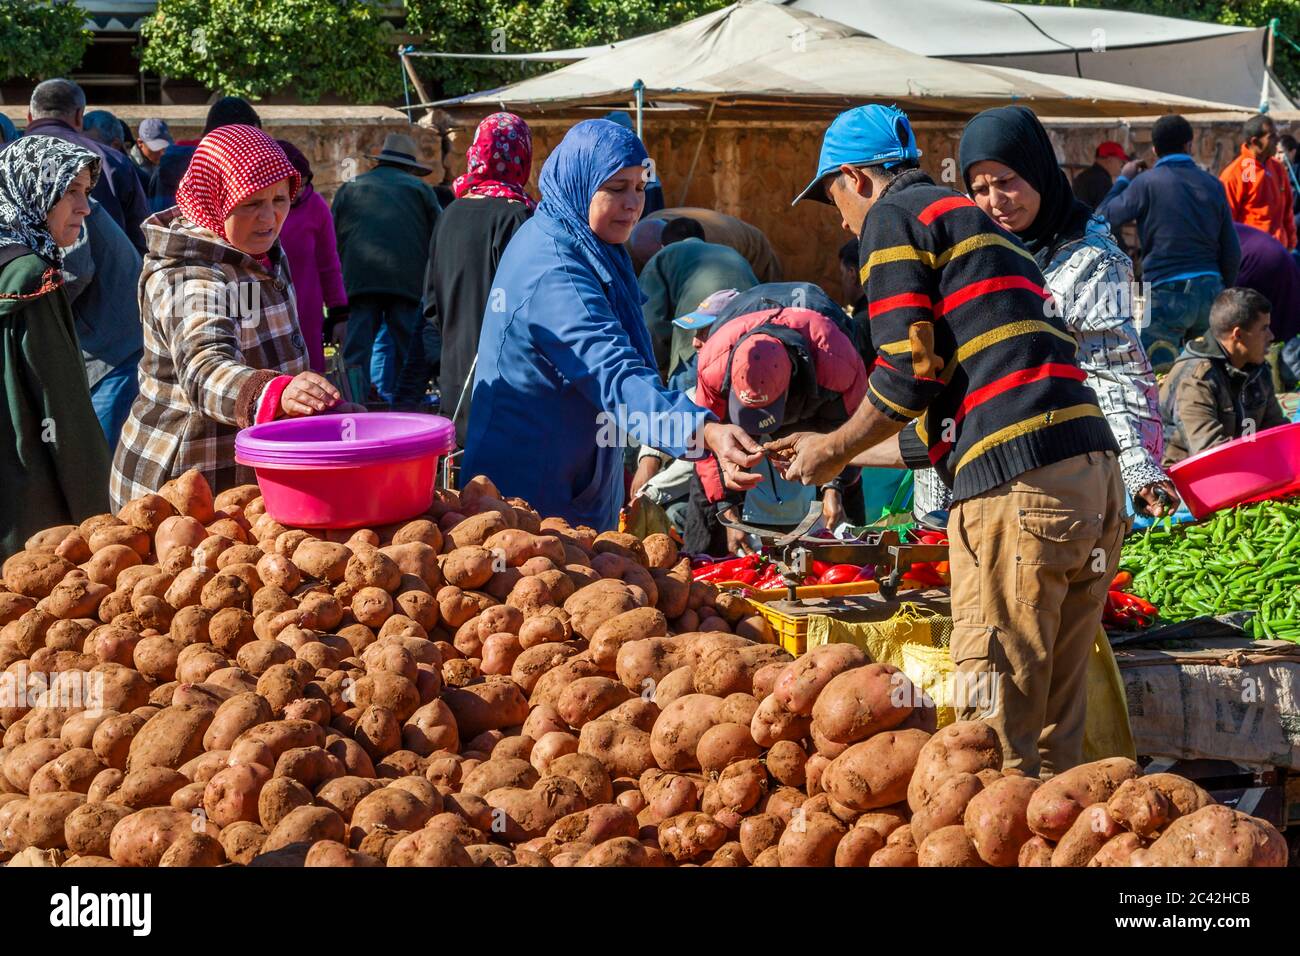 Impressions of Morocco: Potatoes in the vegetable market Stock Photo